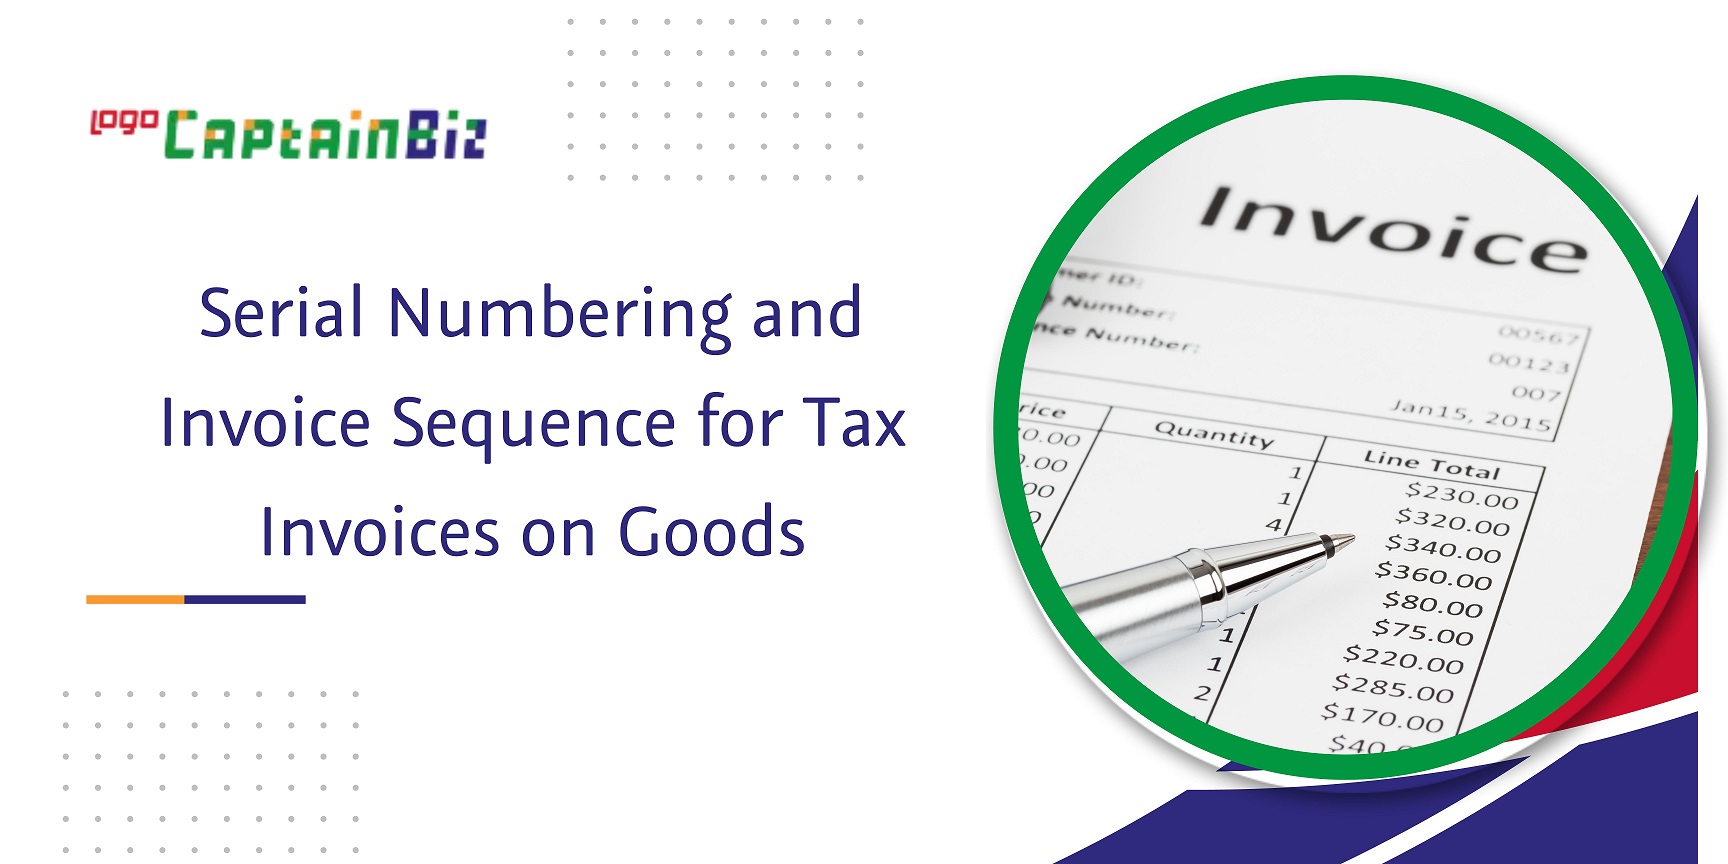 serial numbering and invoice sequence for tax invoices on goods